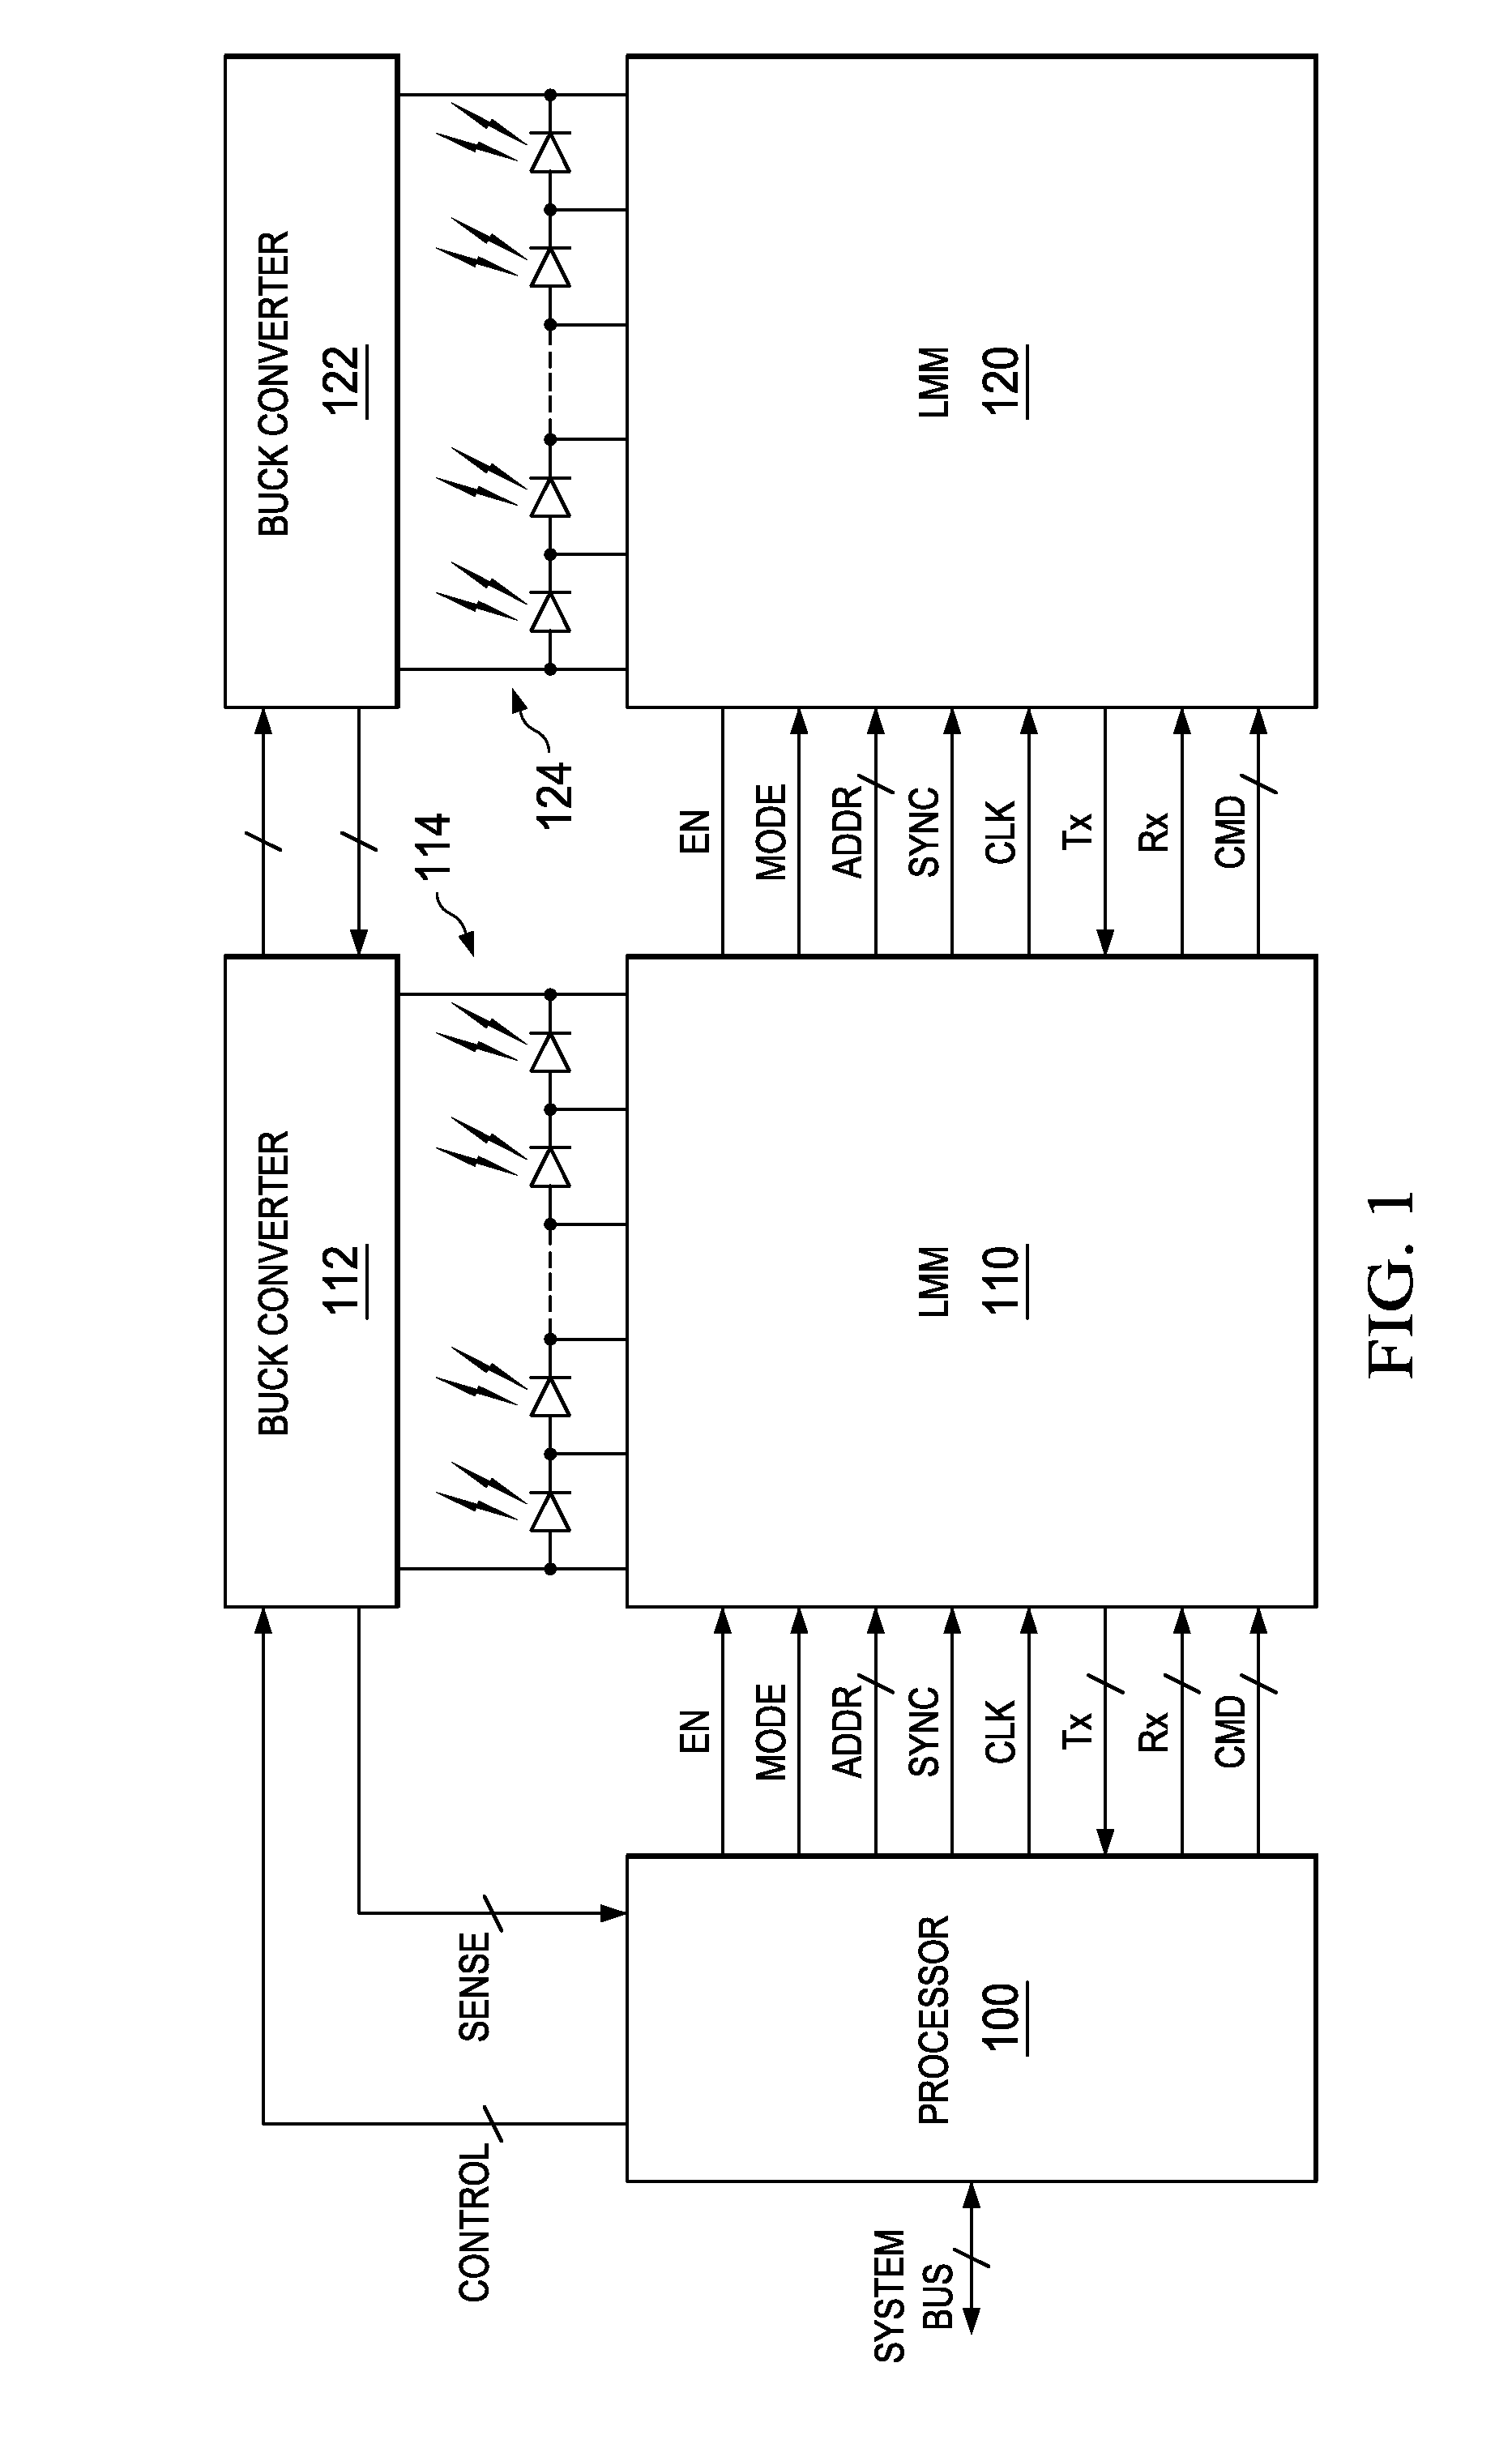 LED bypass and control circuit for fault tolerant LED systems